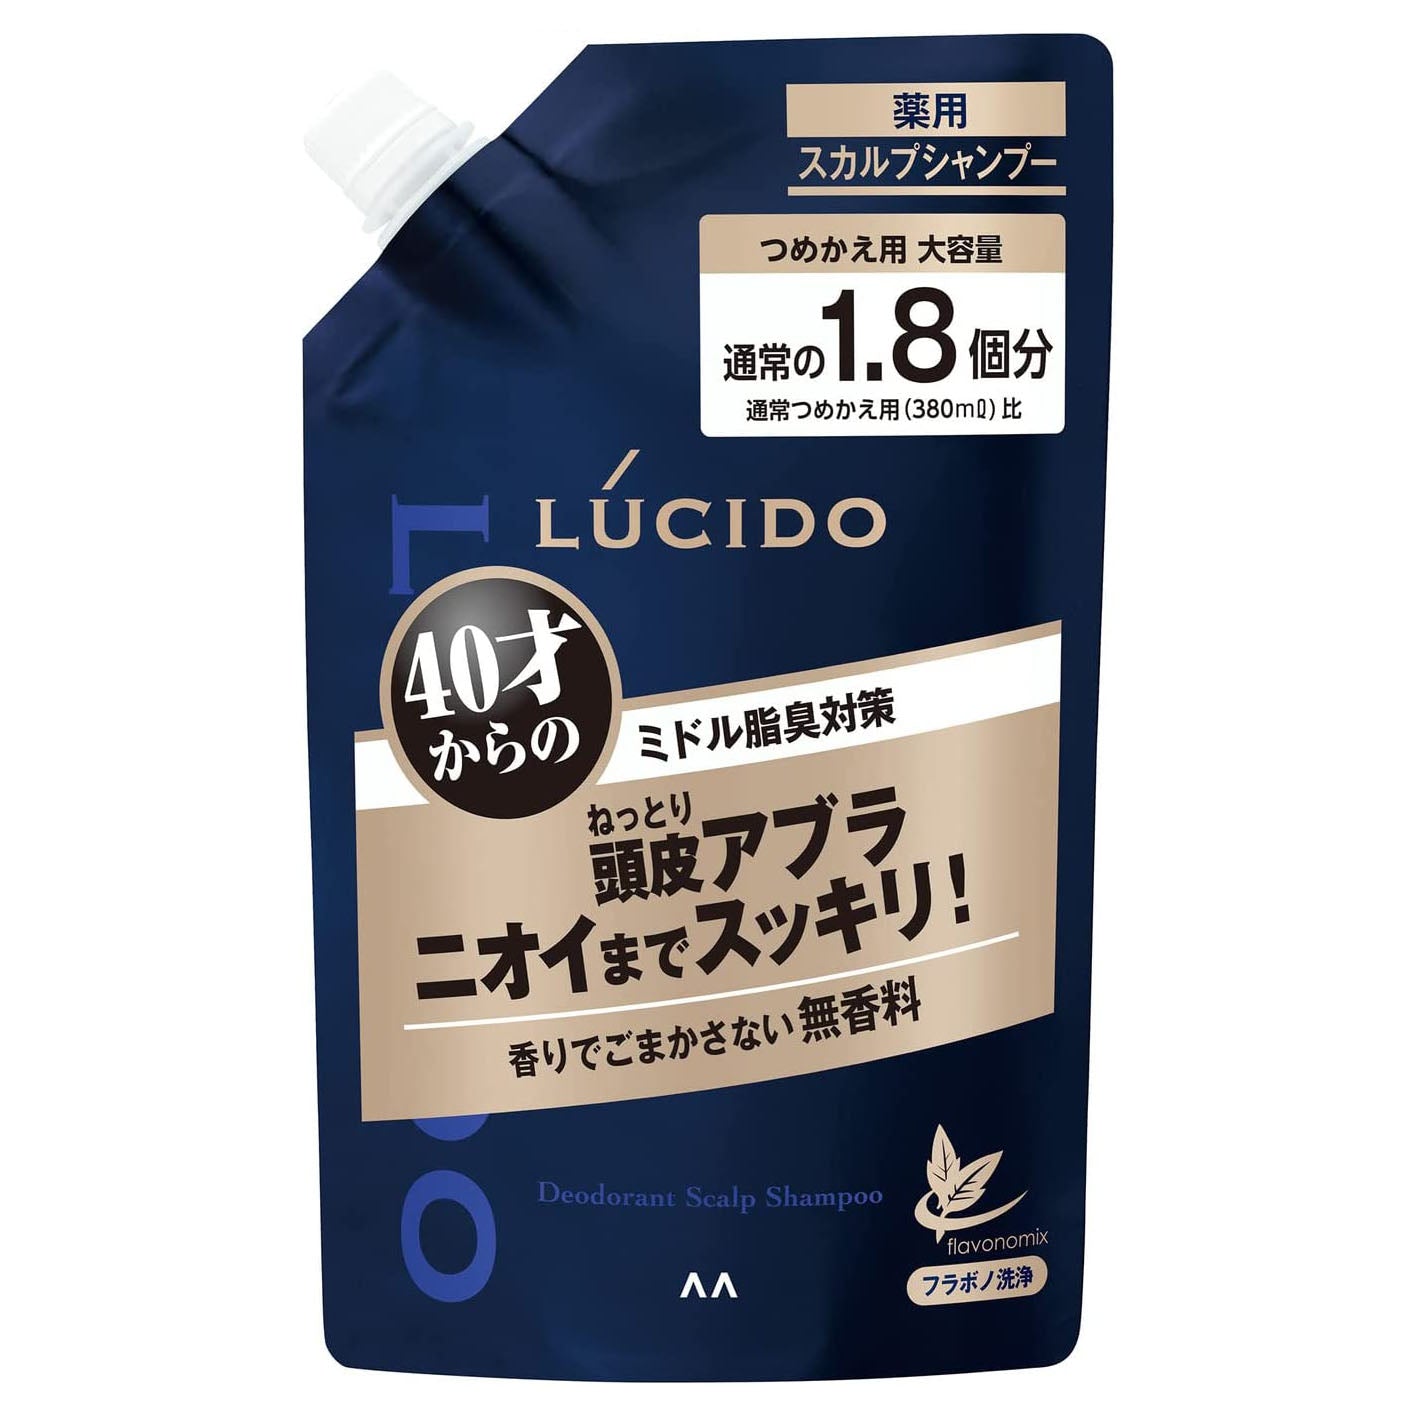 Lucido Medicated Scalp Deodorant Shampoo 684ml - Refill - Harajuku Culture Japan - Japanease Products Store Beauty and Stationery